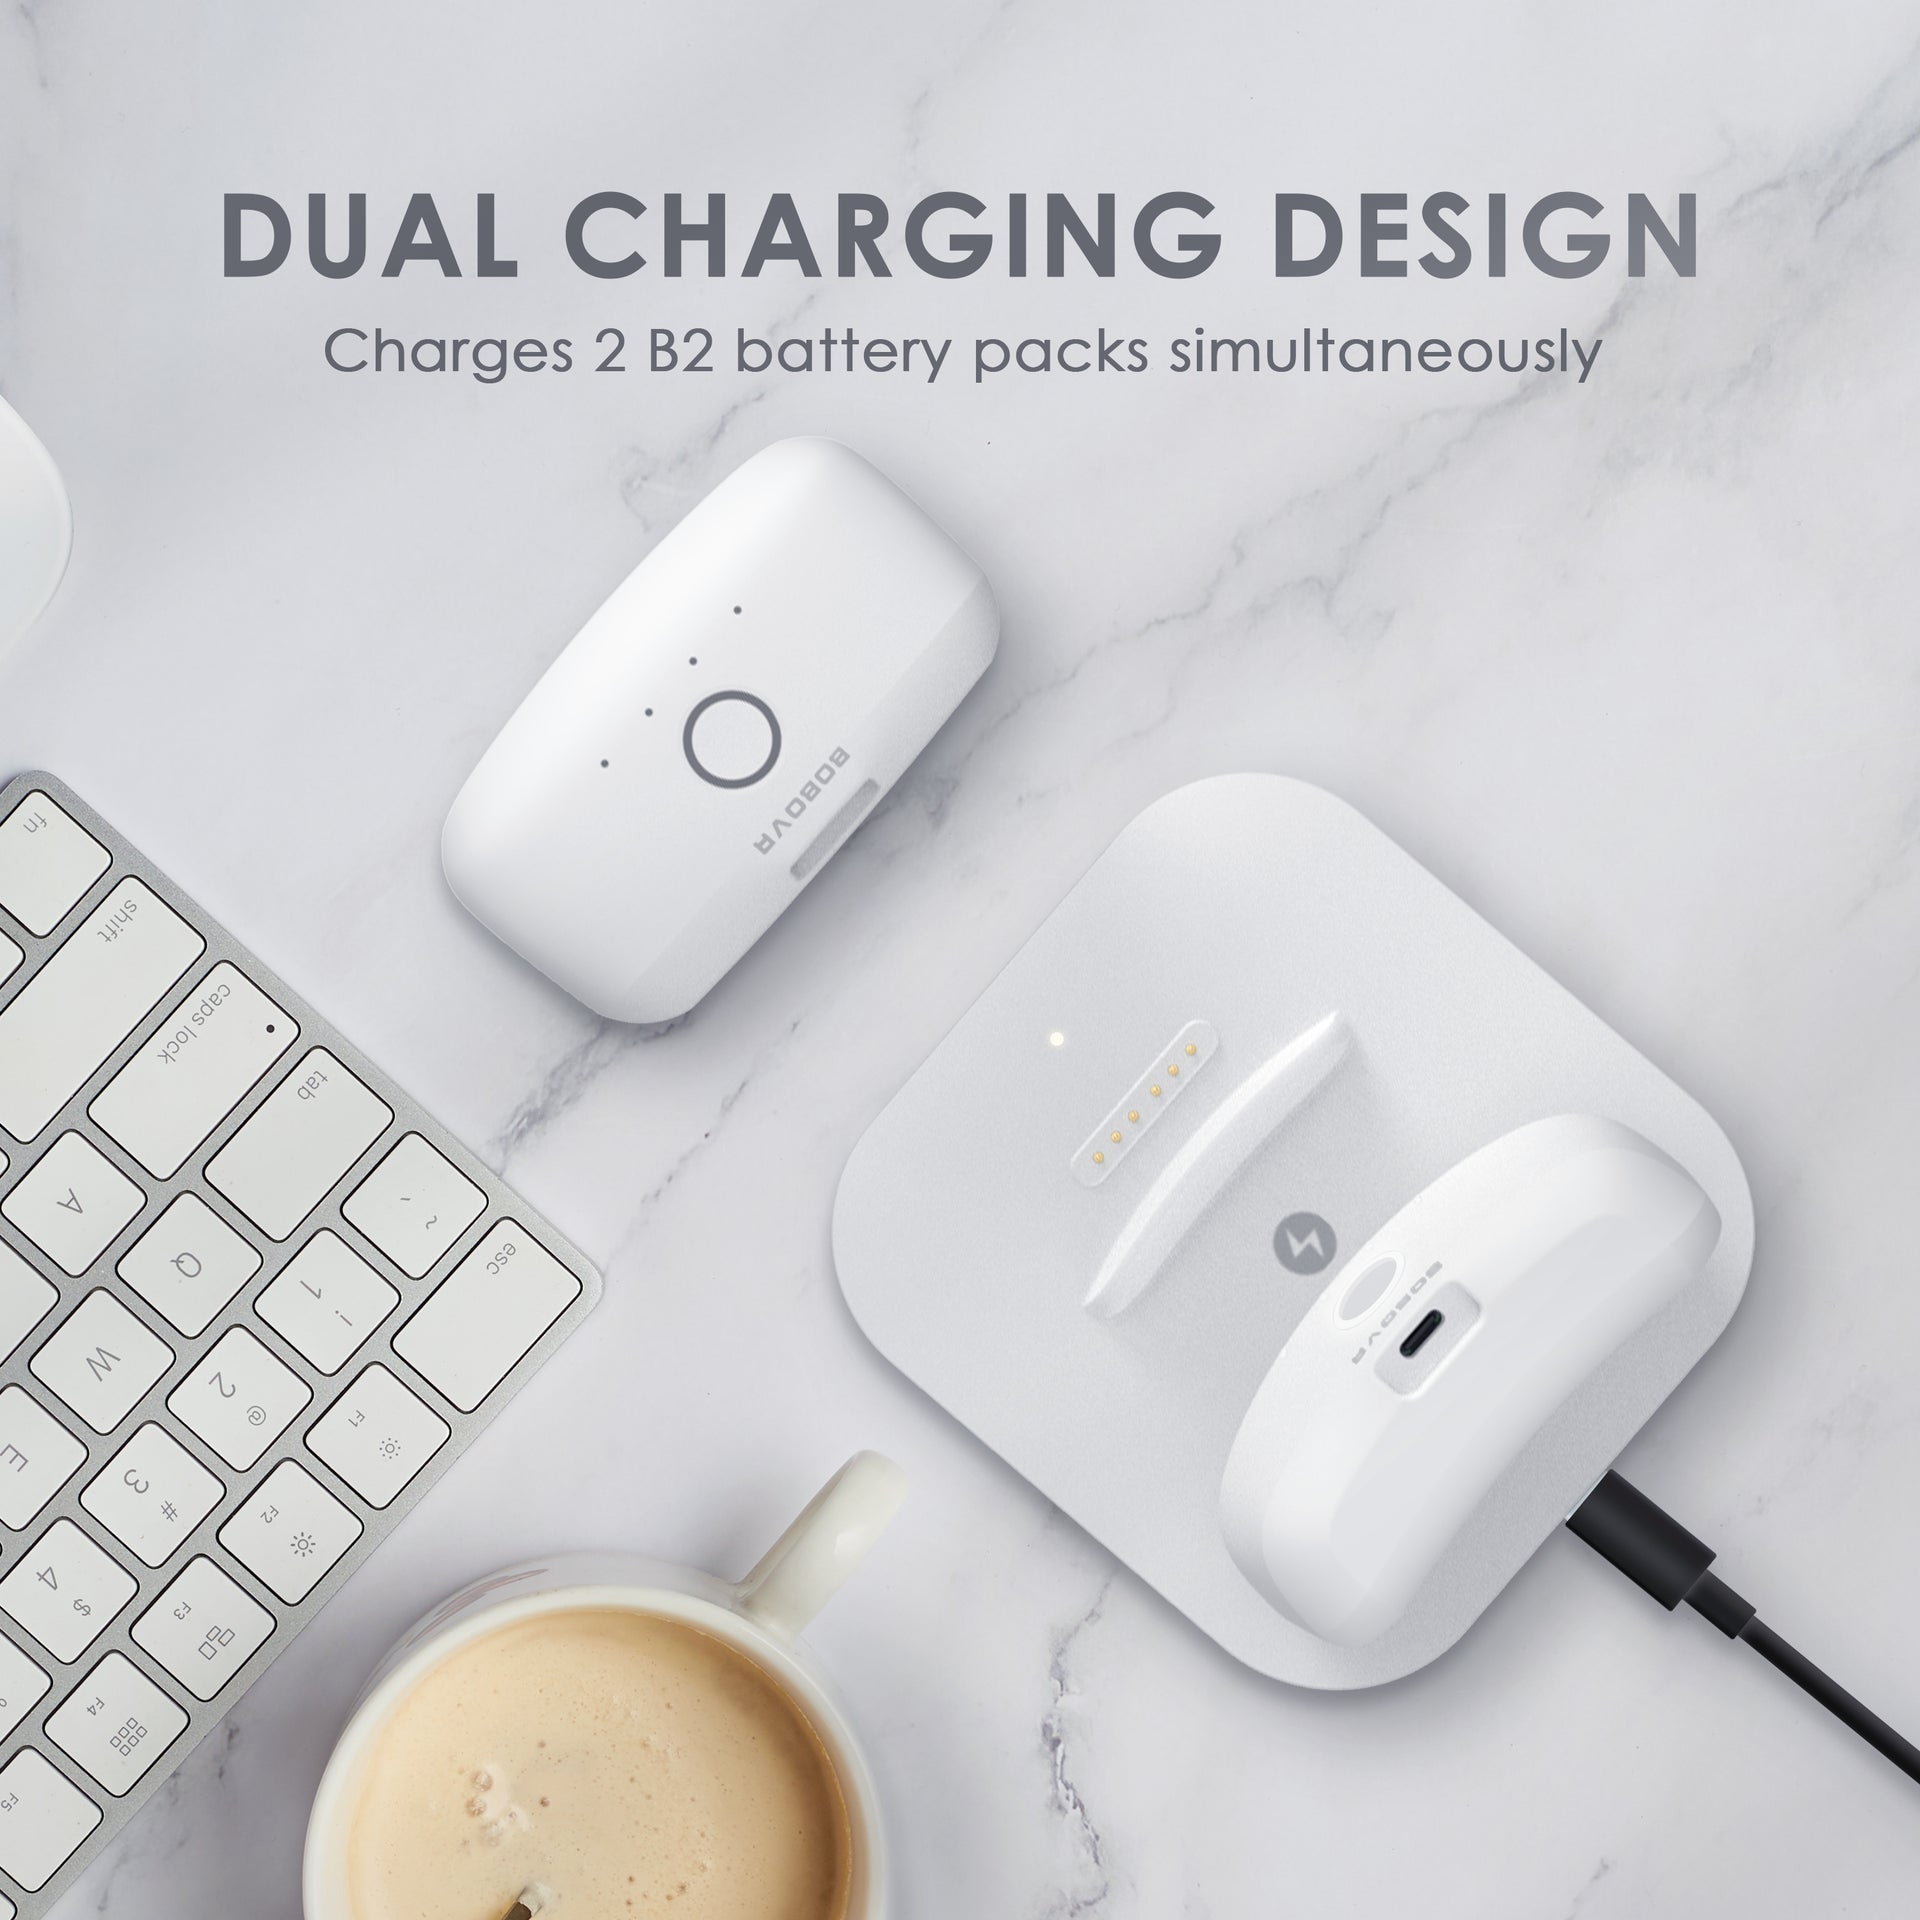 BOBOVR Twin Charger Station/Dock for B2 Battery Pack,Ultra-Thin Design, Magnetically Supply Power to 2 B2 Battery Packs at The Same Time